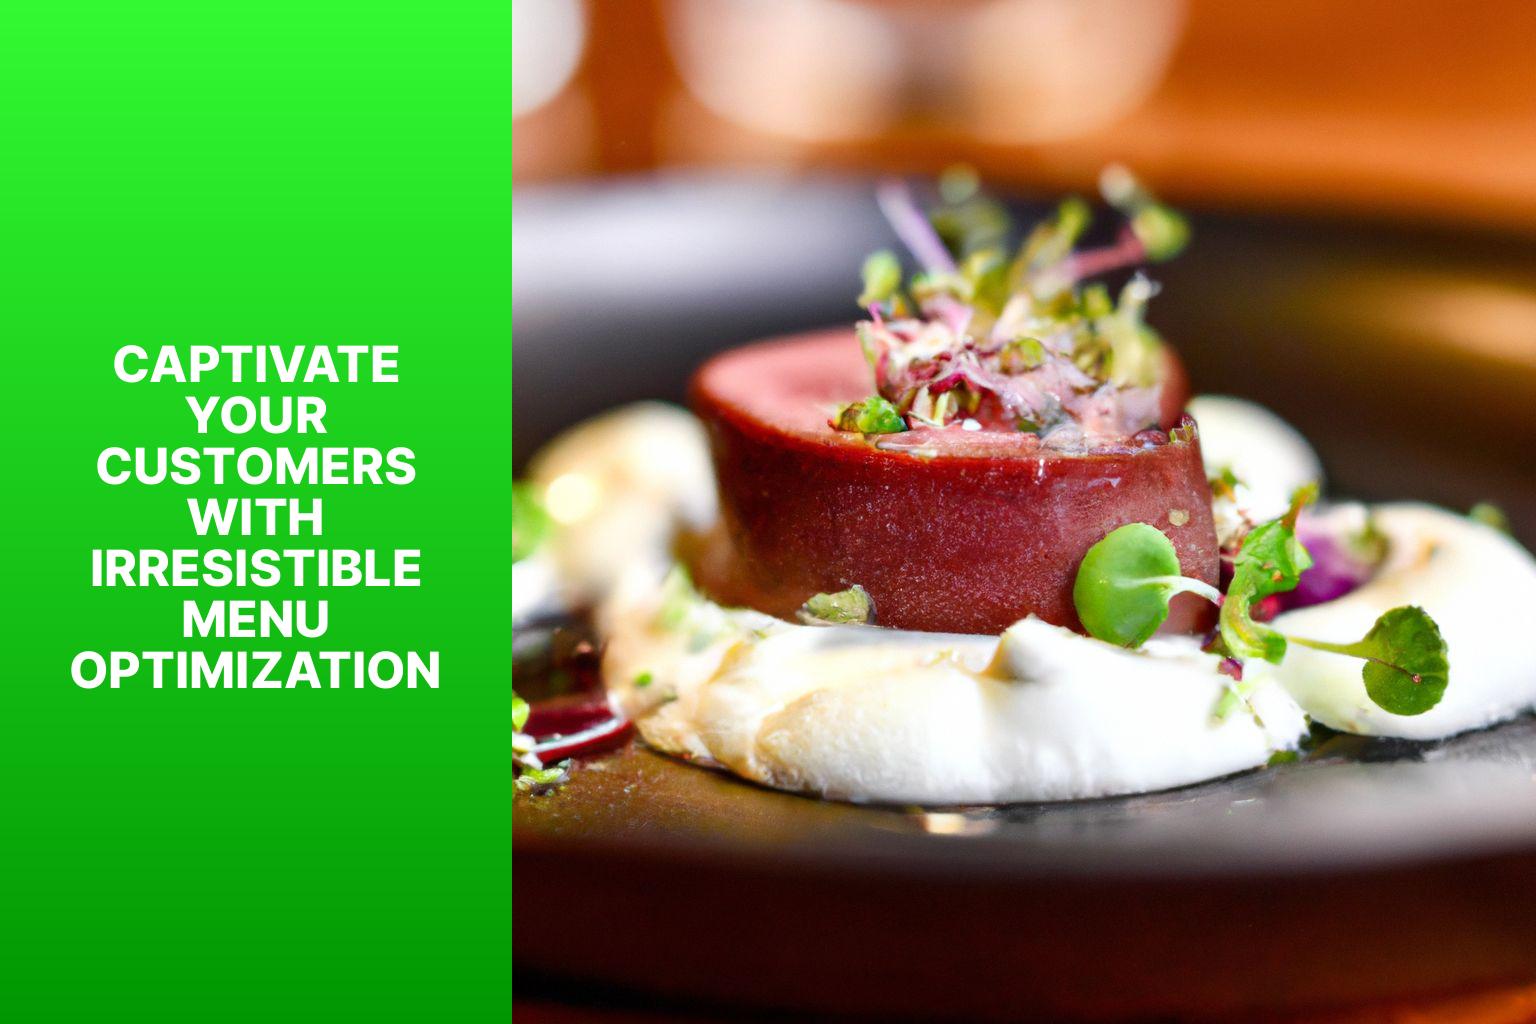 Captivate Your Customers with Irresistible Menu Optimization